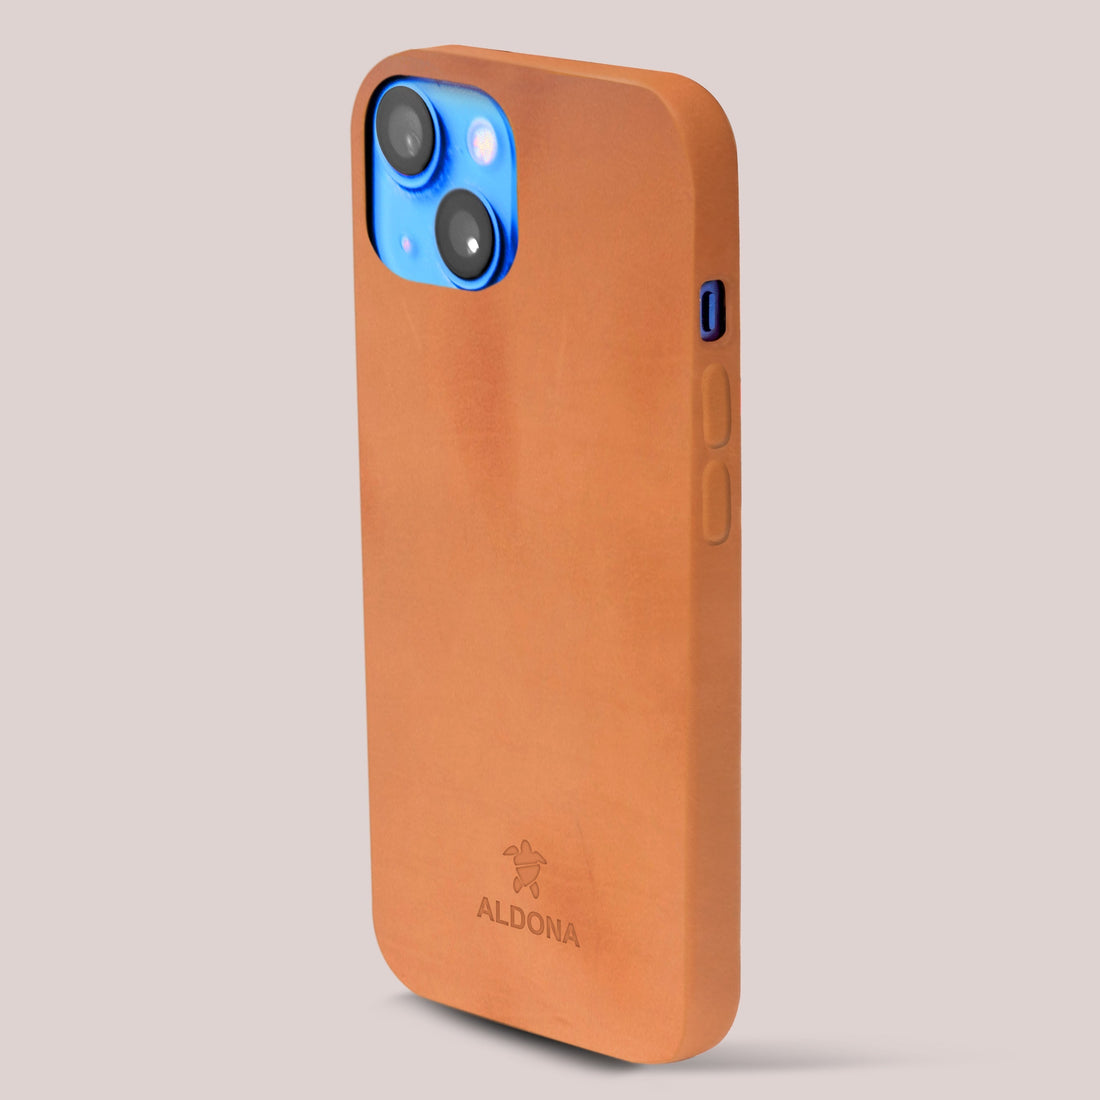 Kalon Case for iPhone 12 Mini series with MagSafe Compatibility - Burnt Tobacco